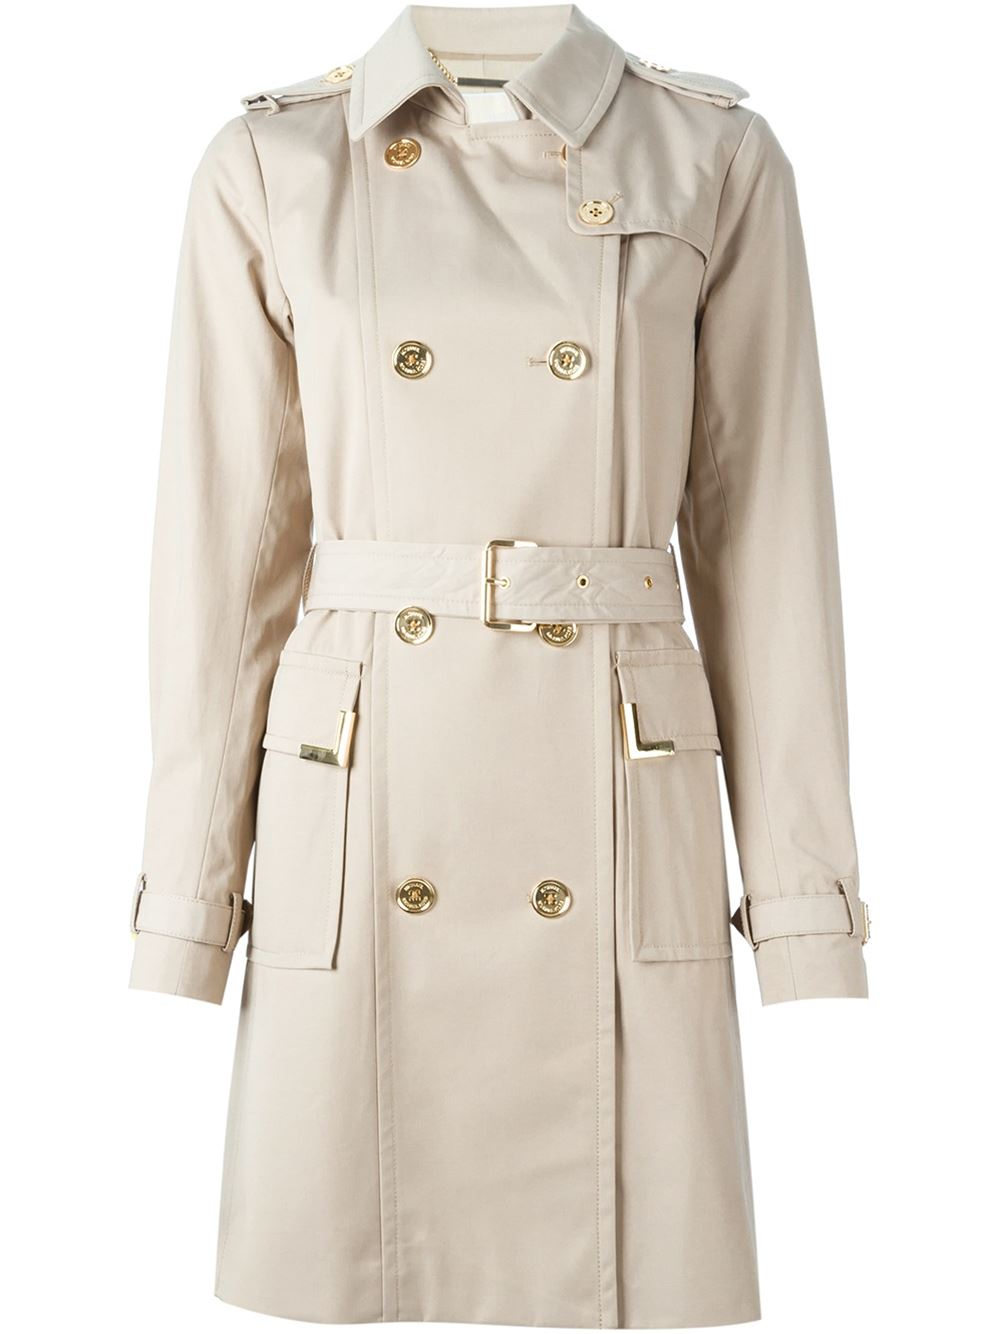 Lyst - Michael Michael Kors 'beverly' Trench Coat in Natural